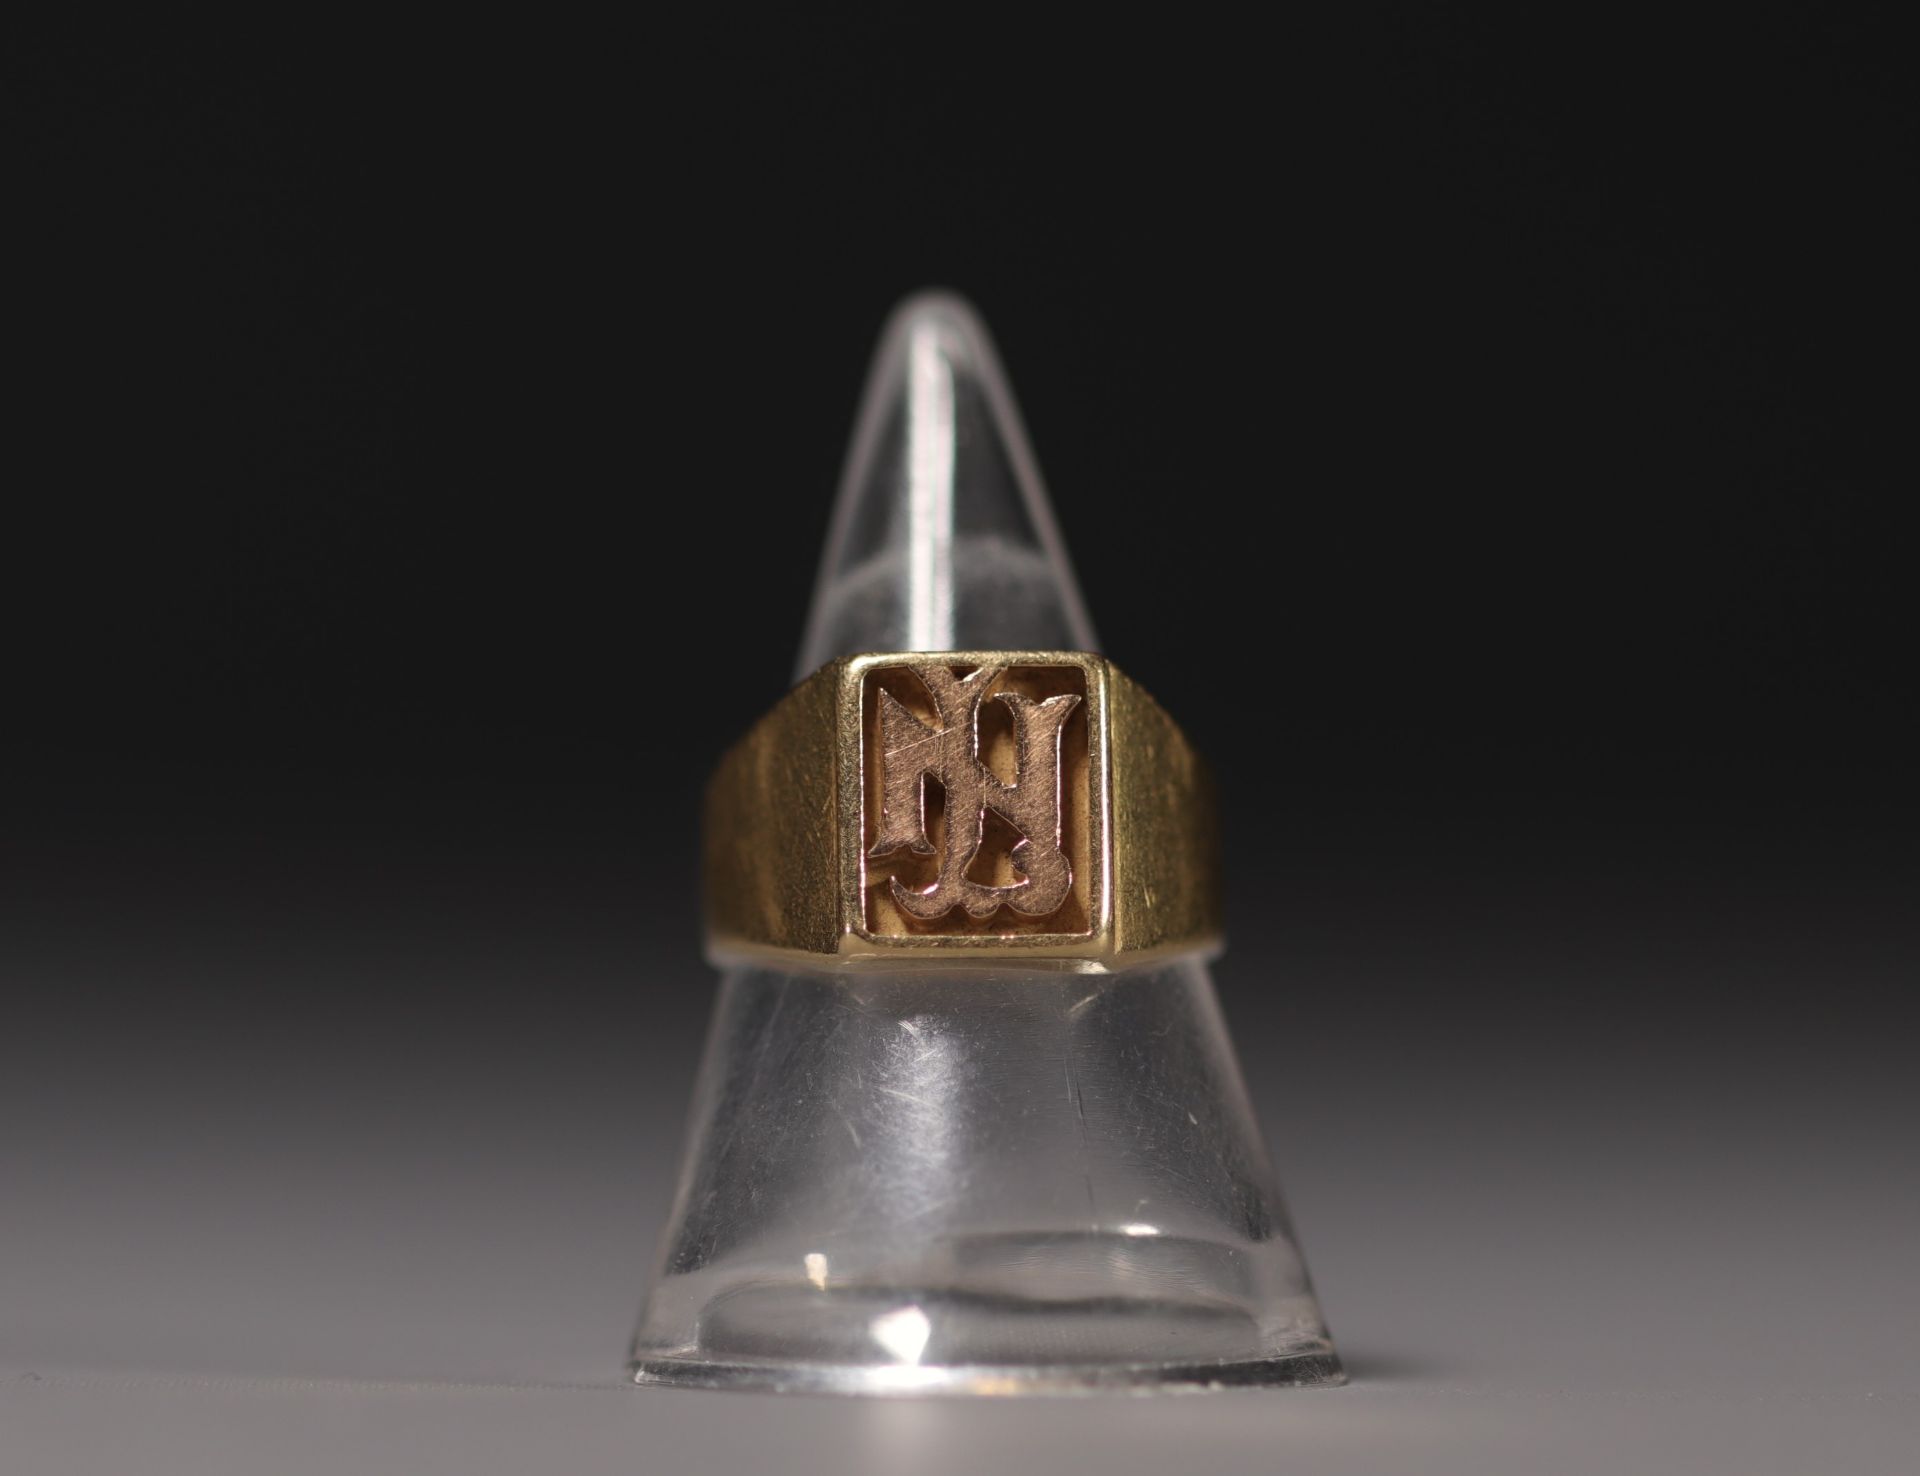 Chevaliere in 18k yellow gold engraved with "NL", weighing 7.3gr.